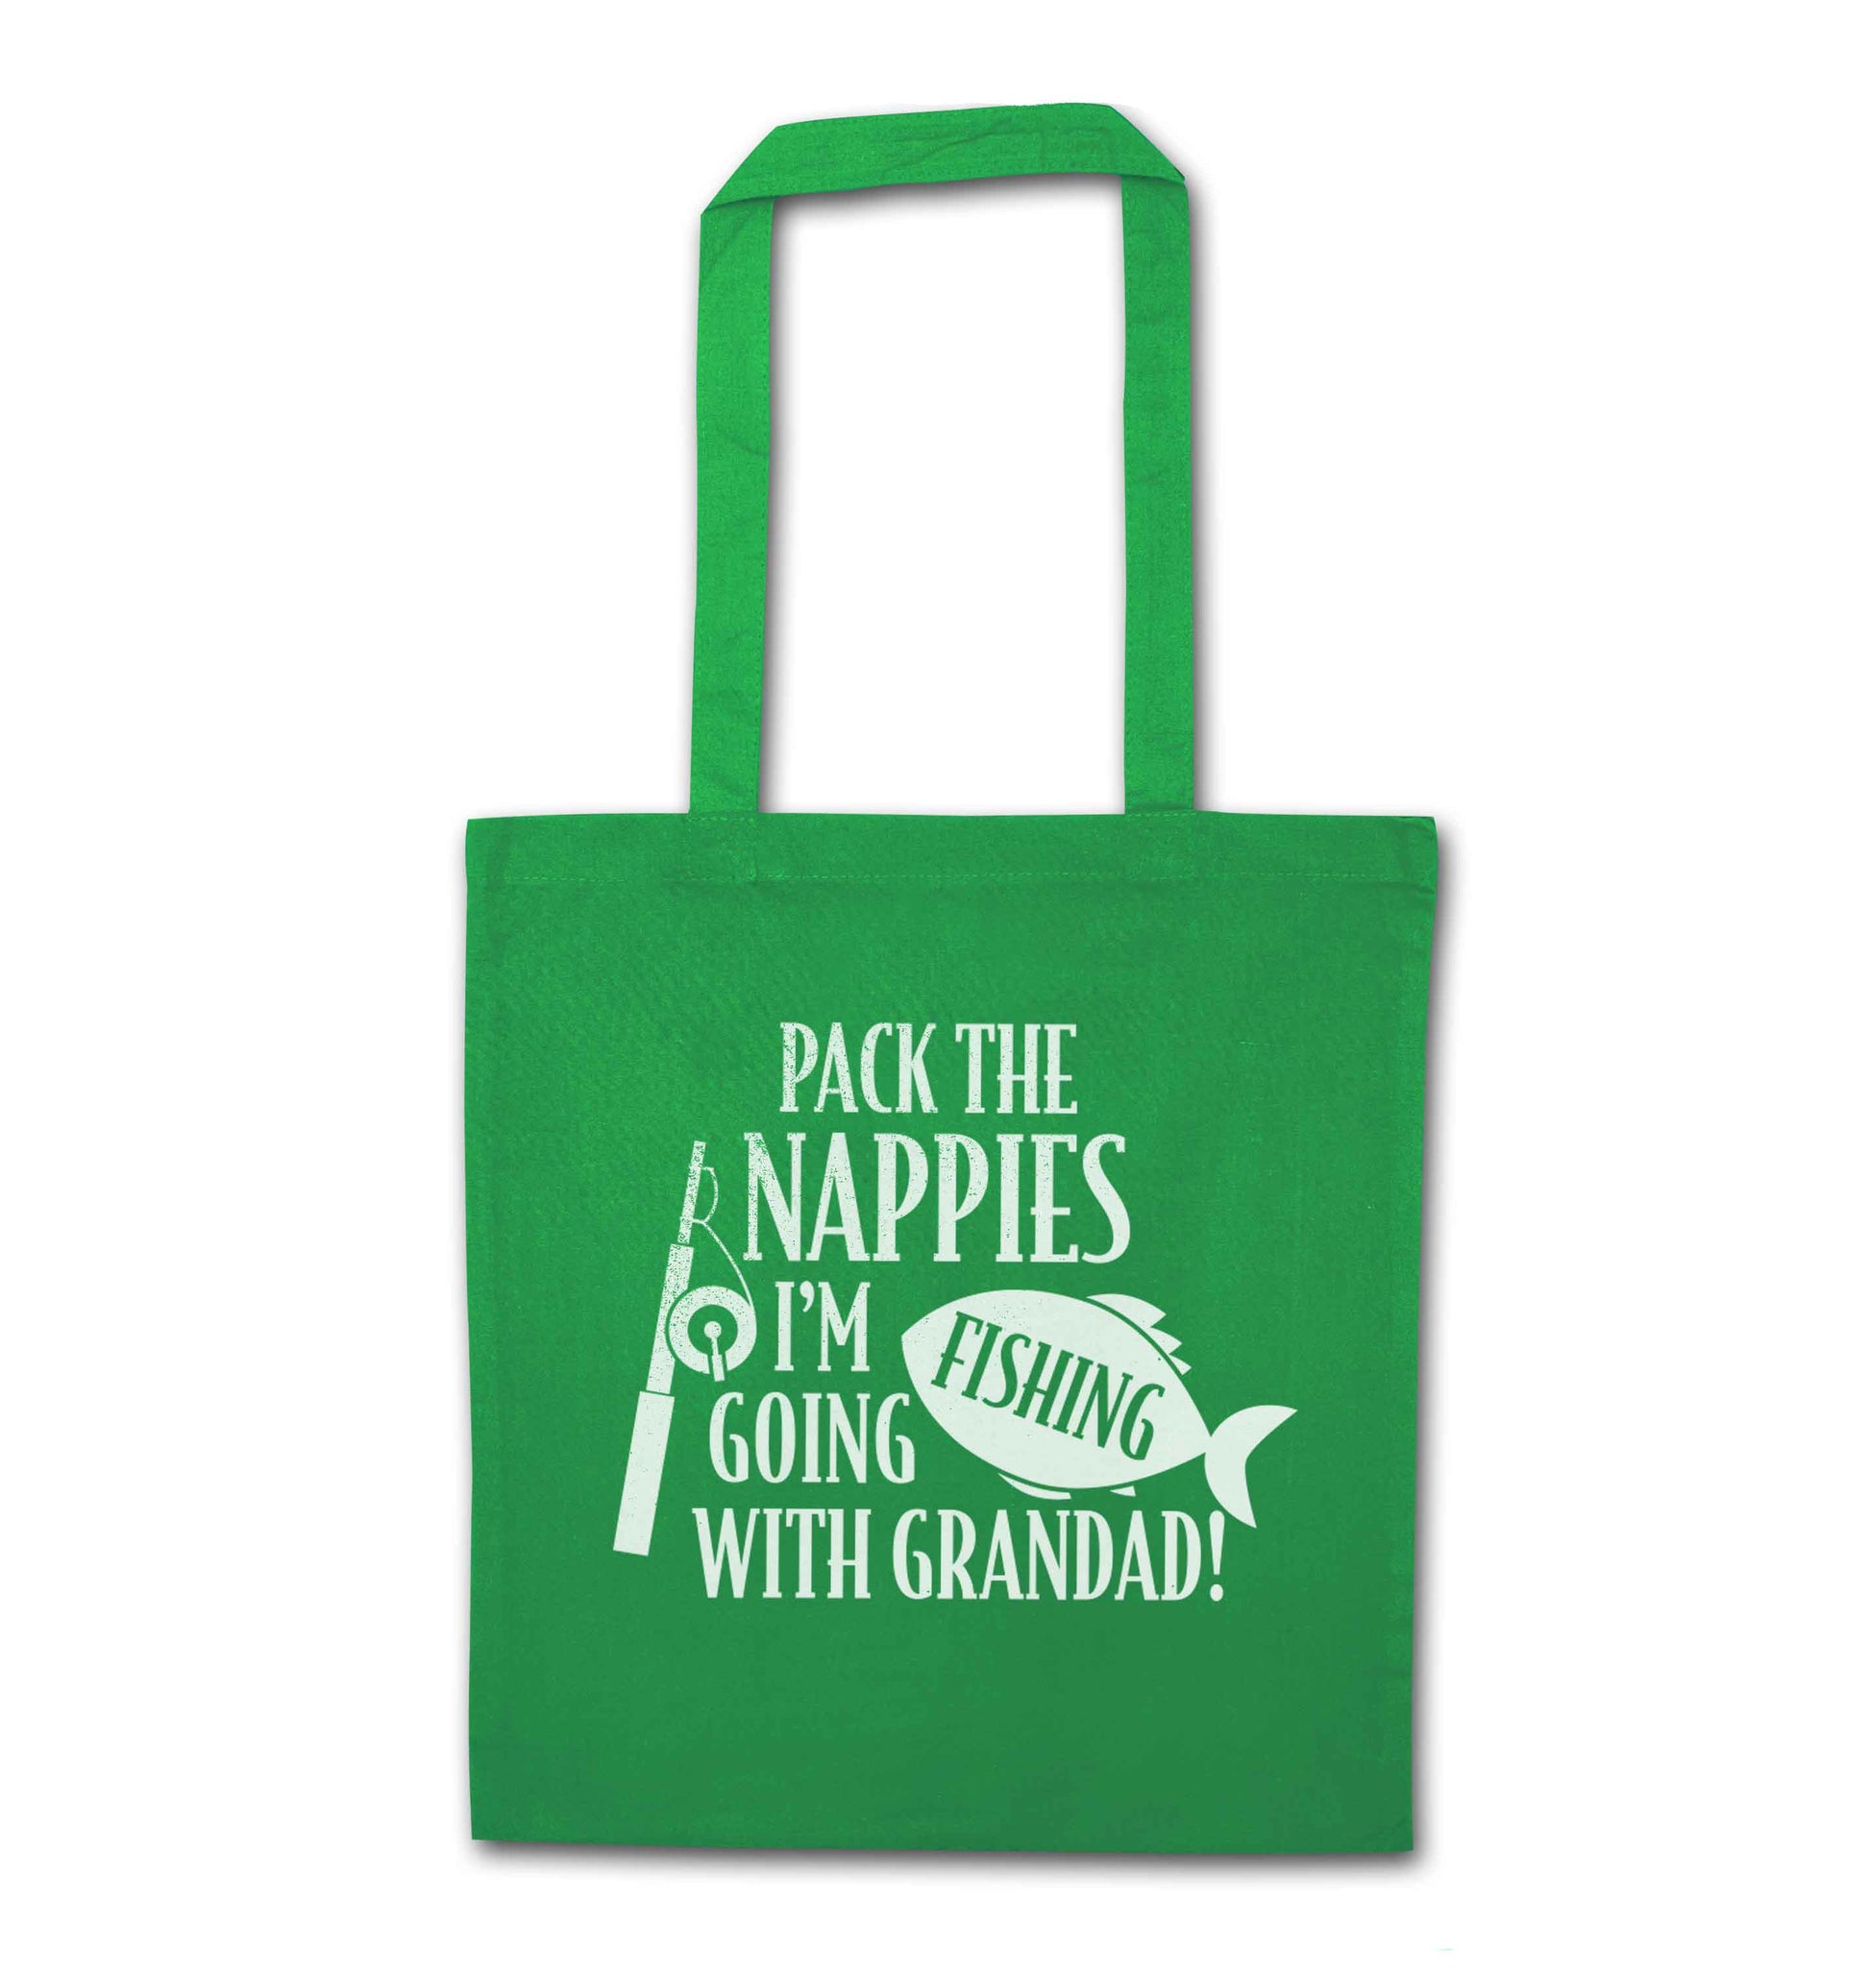 Pack the nappies I'm going fishing with Grandad green tote bag